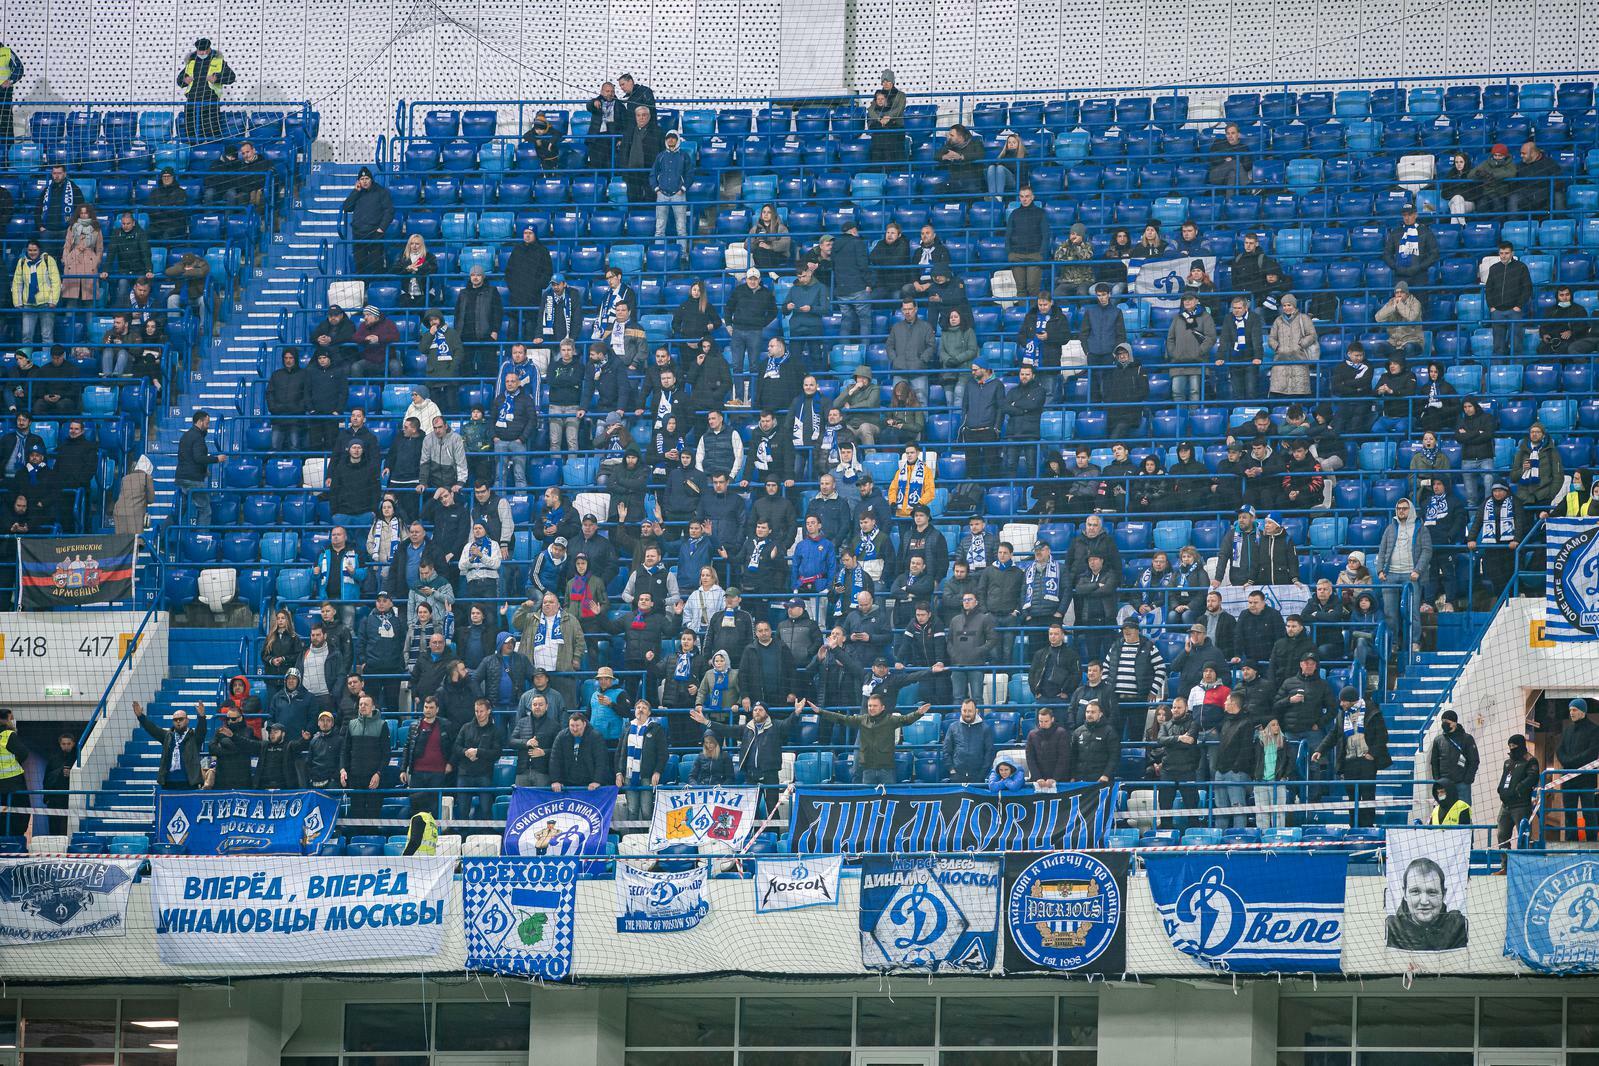 FC Dynamo Moscow News | Information for fans traveling to support the team in Kaliningrad. The official website of Dynamo club.